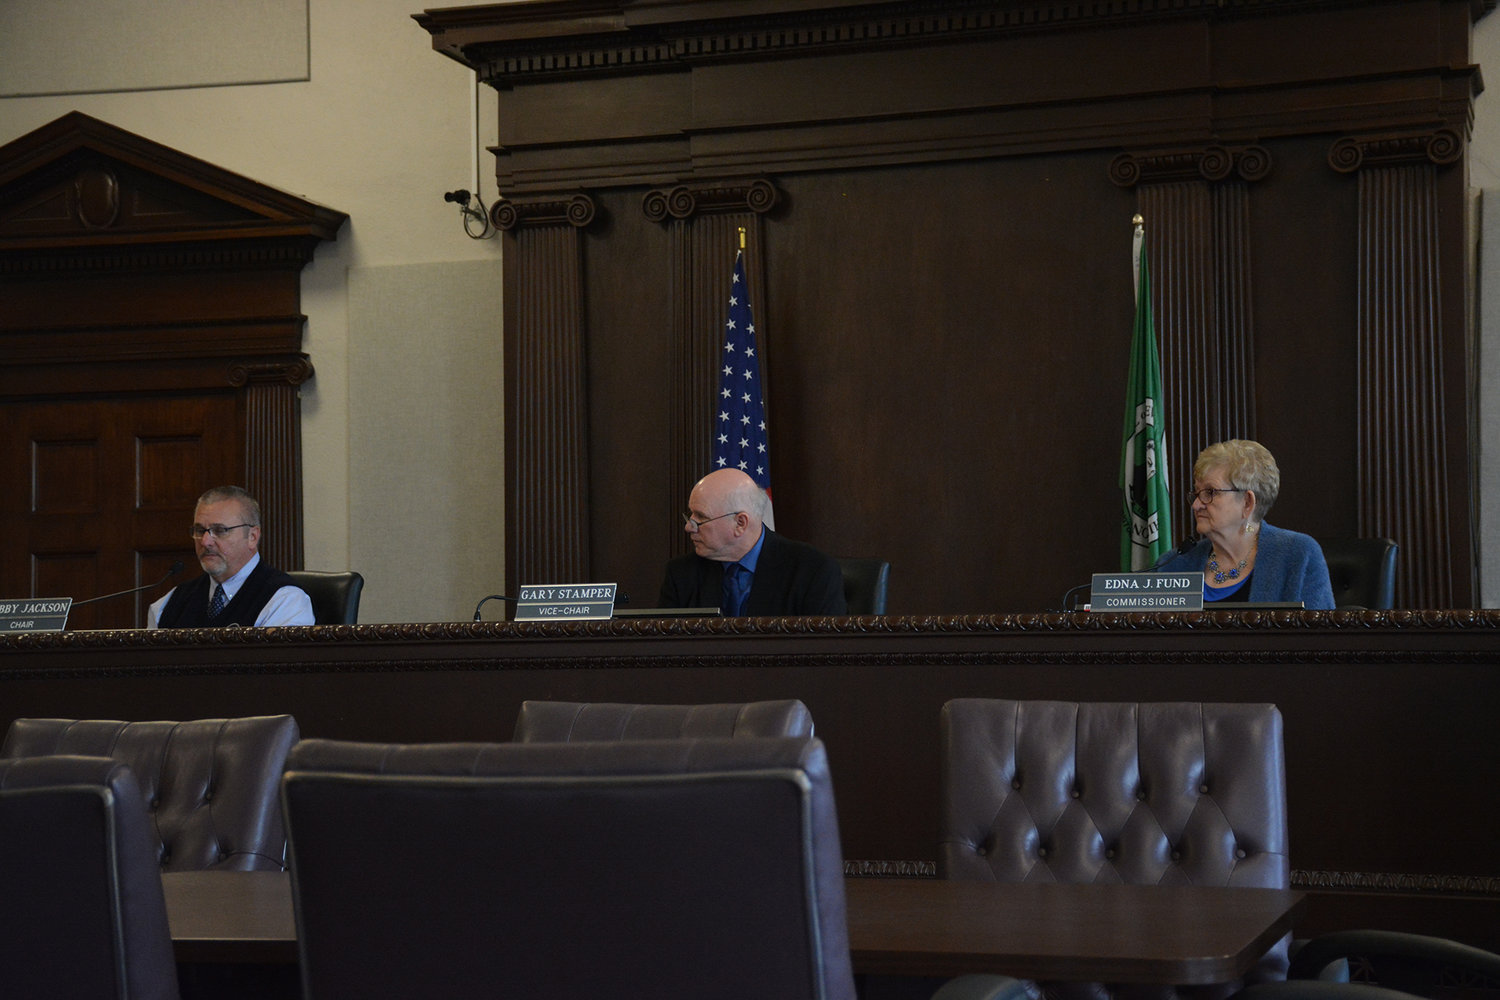 Lewis County commissioners Bobby Jackson, left, Gary Stamper, center, and Edna Fund, right, are holding a public meeting Tuesday to seek input ahead of a workshop of state and local leaders on the Growth Management Act.